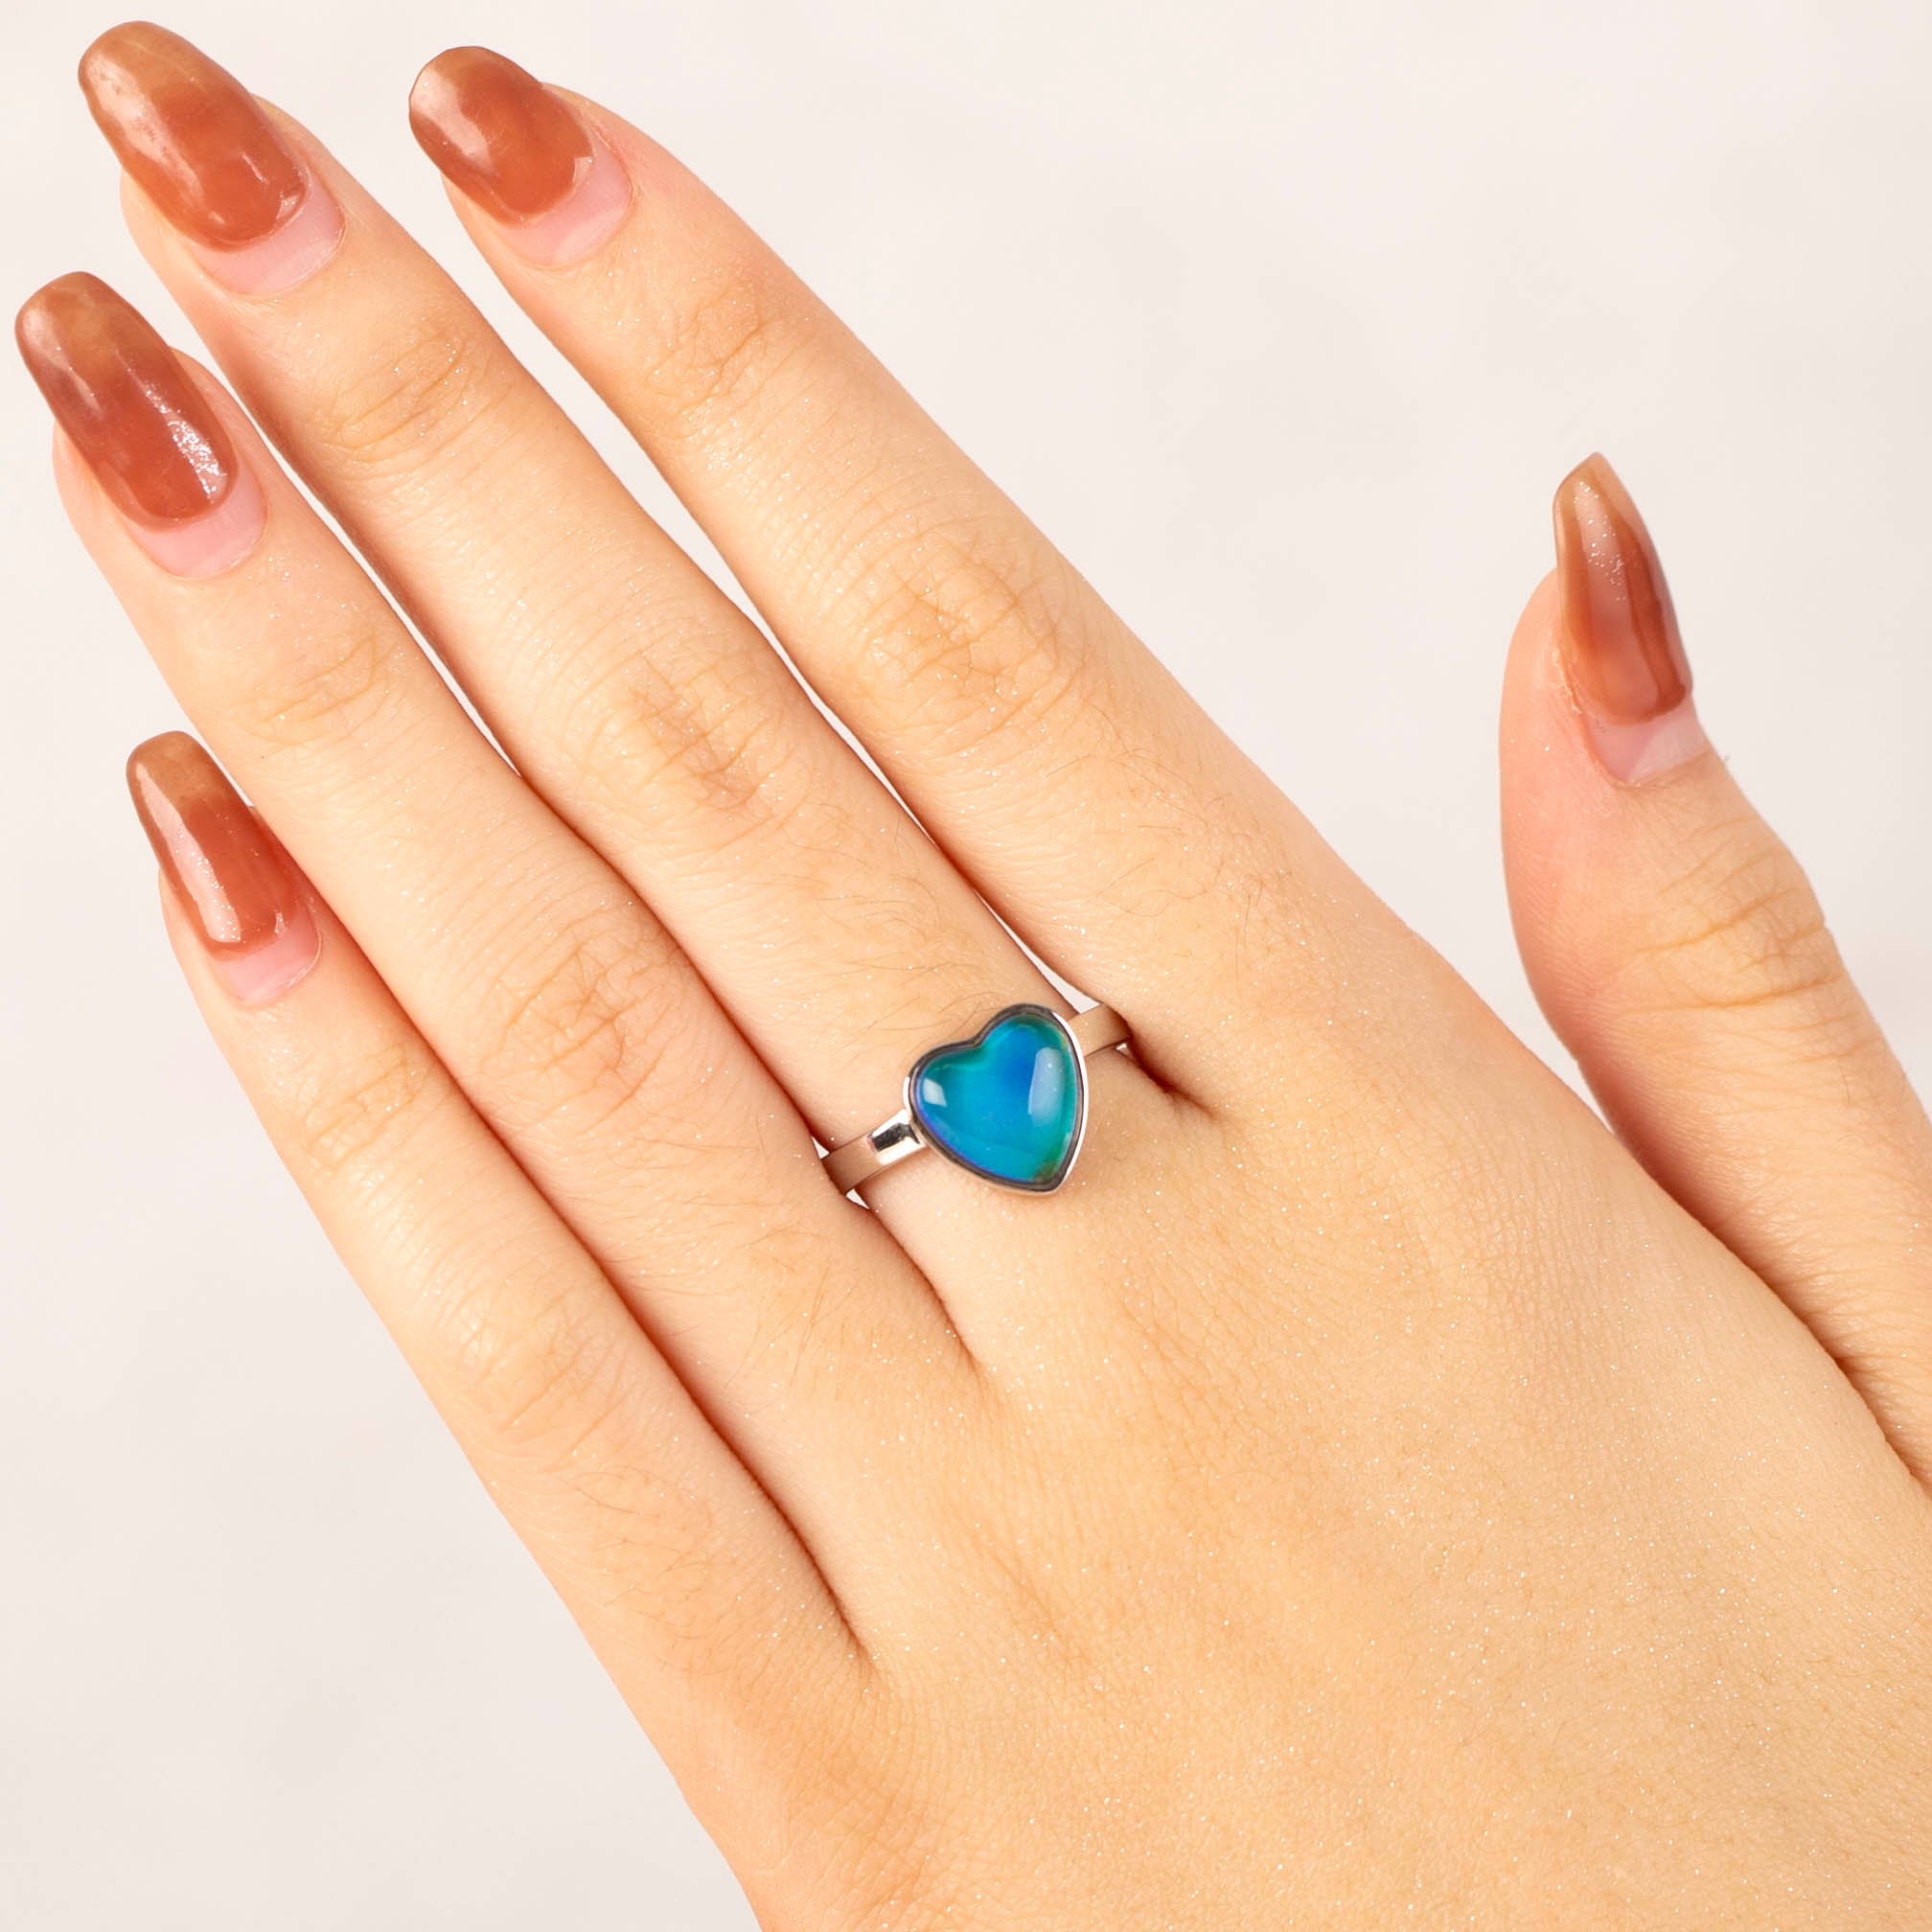 Handmade Heart Shaped Color Changing Mood Ring In Sterling Silver - aurorapromise